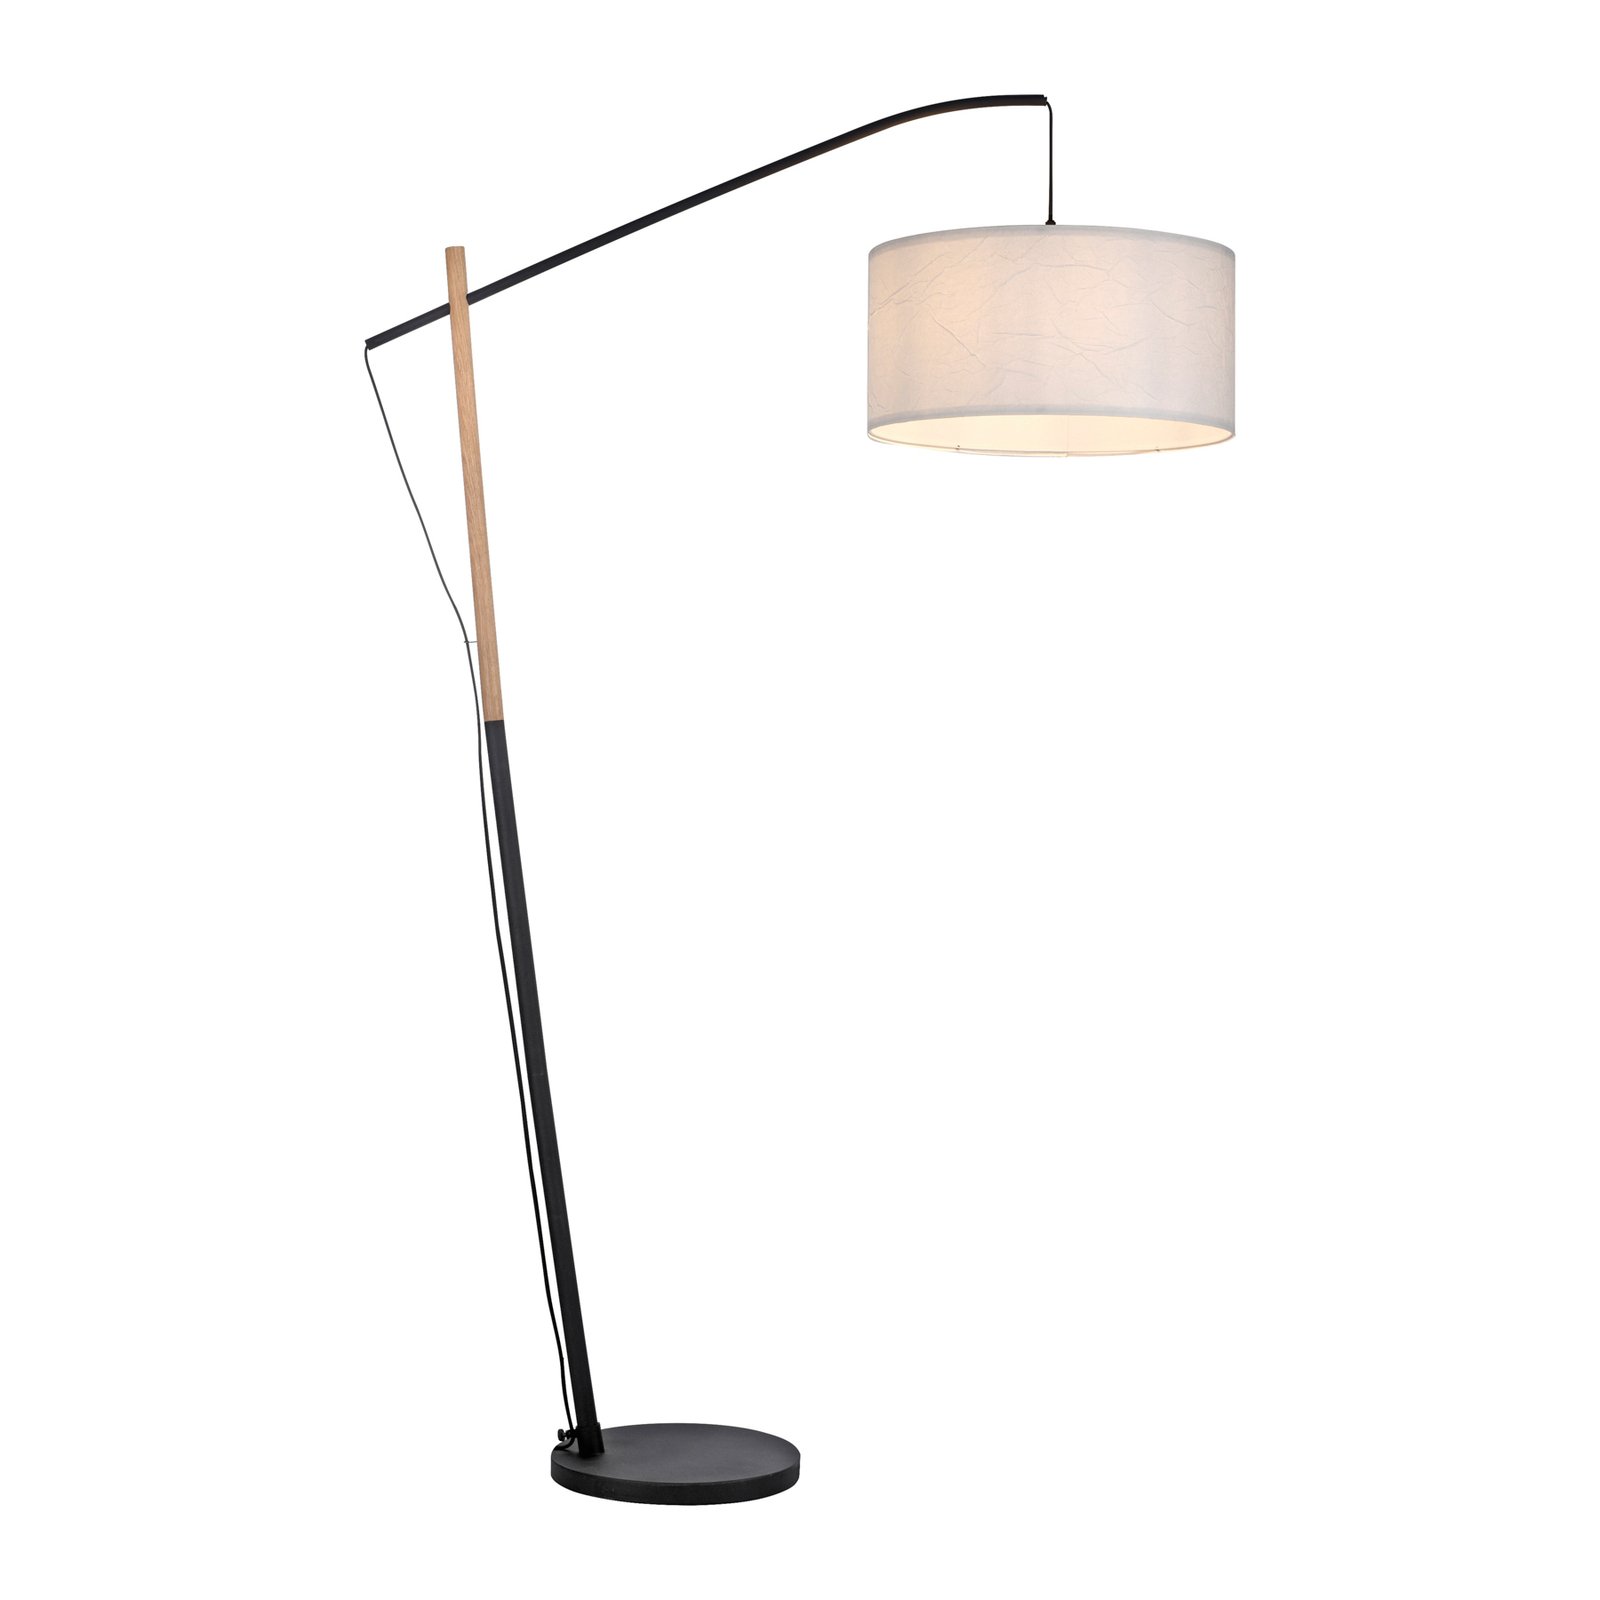 Green Sofie floor lamp with paper shade